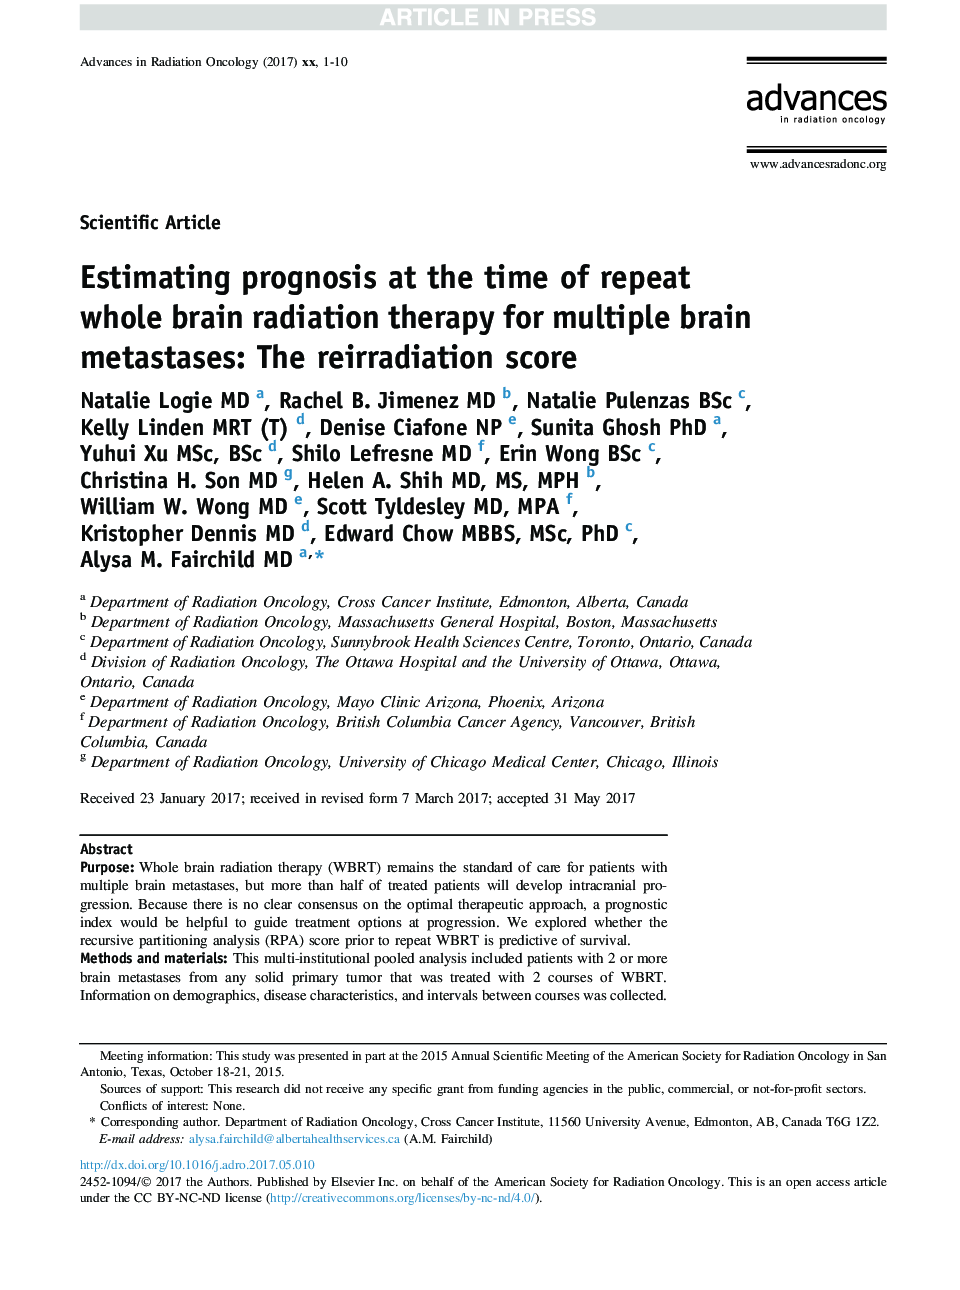 Estimating prognosis at the time of repeat whole brain radiation therapy for multiple brain metastases: The reirradiation score